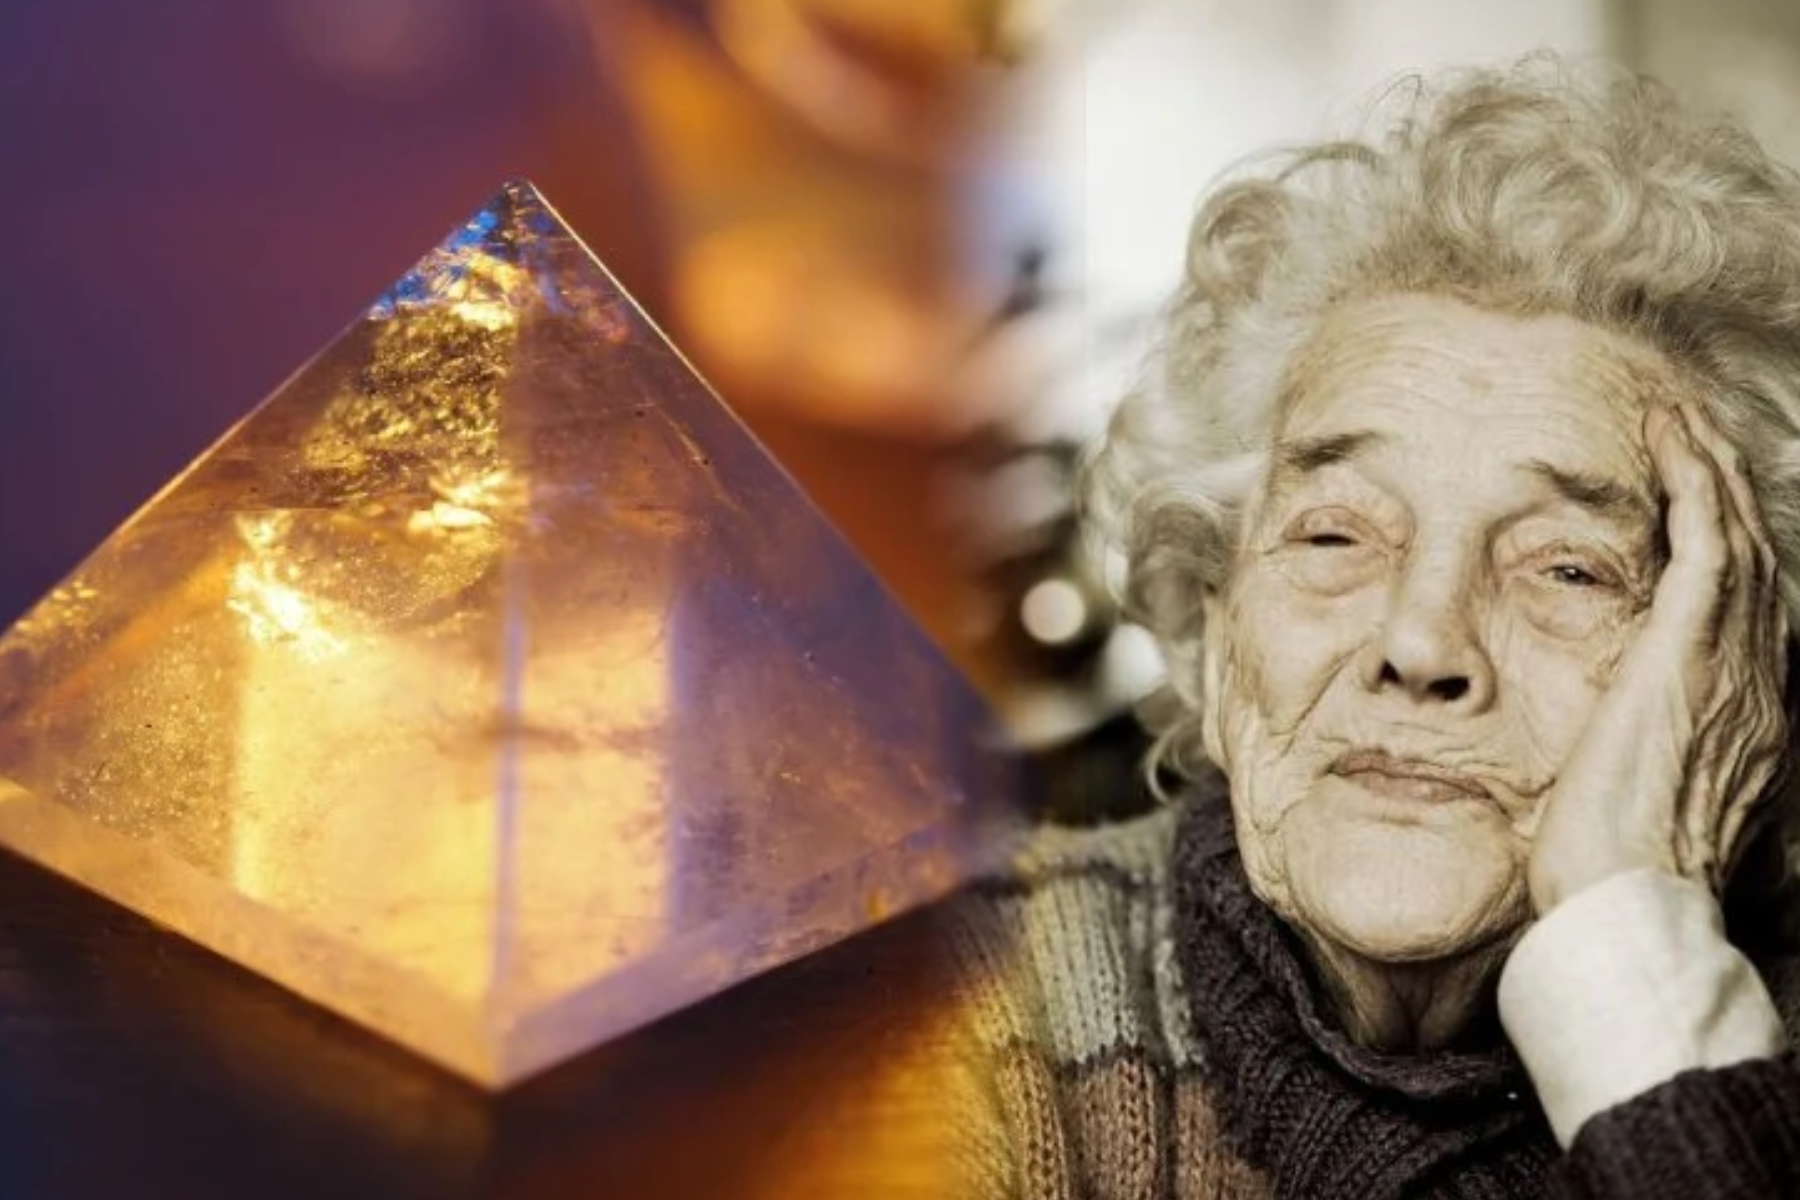 Crystals For Memory - The Claimed Psychologically-Proven Benefits